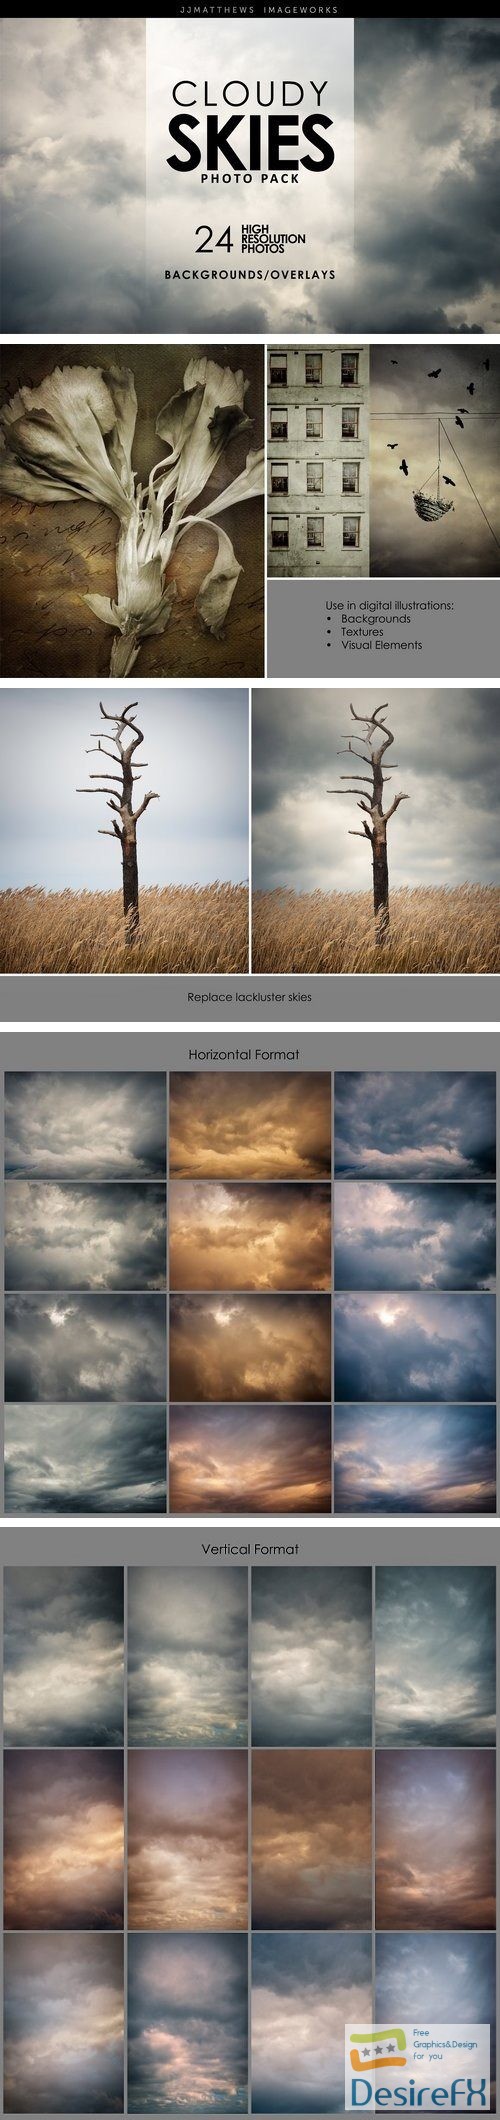 Cloudy Skies-Backgrounds & Overlays - 2083980